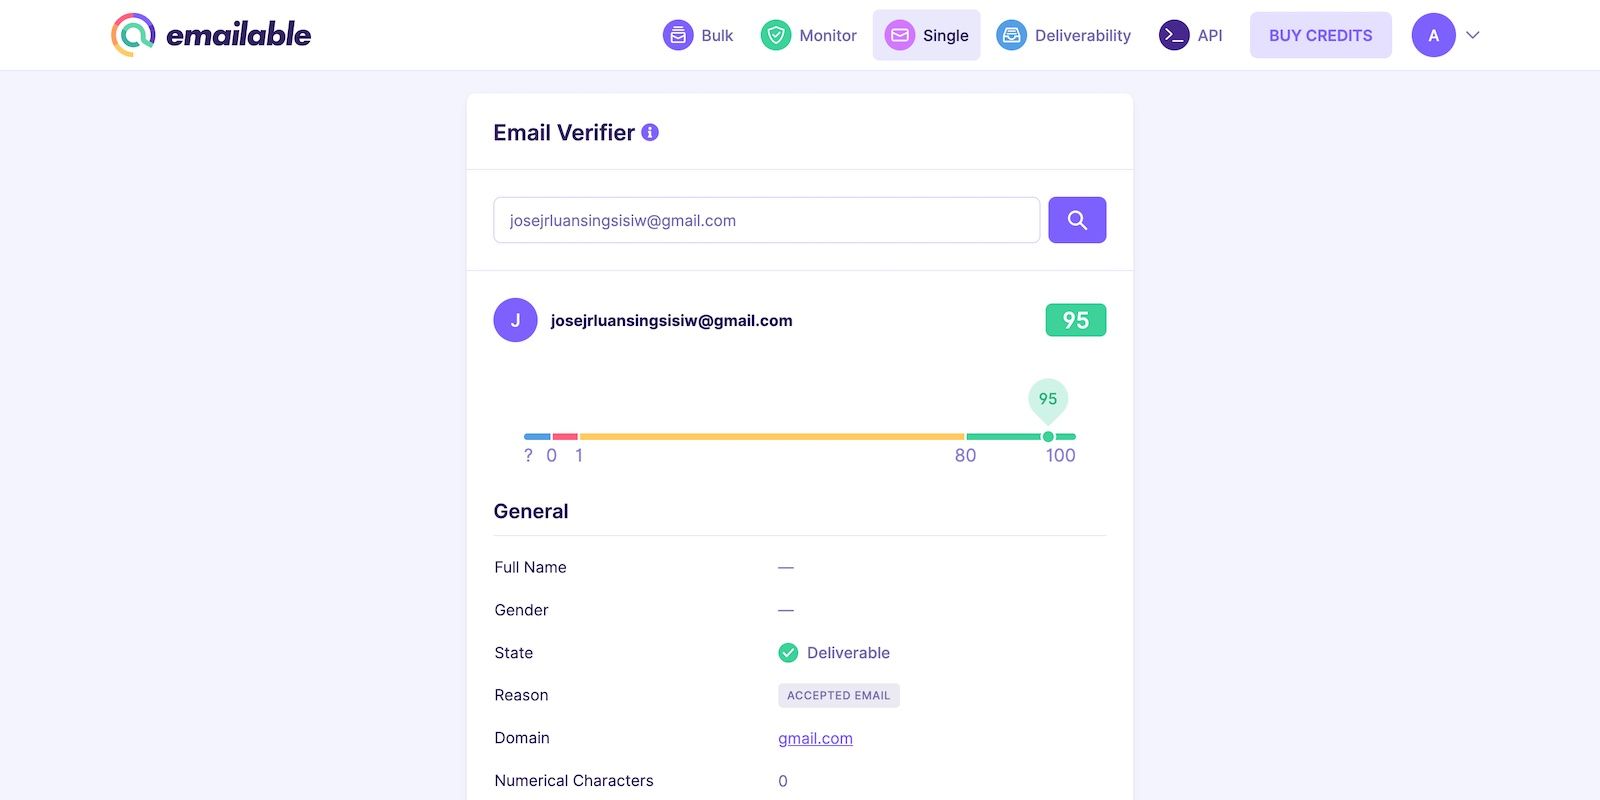 Email Verification Results and Data at Emailable